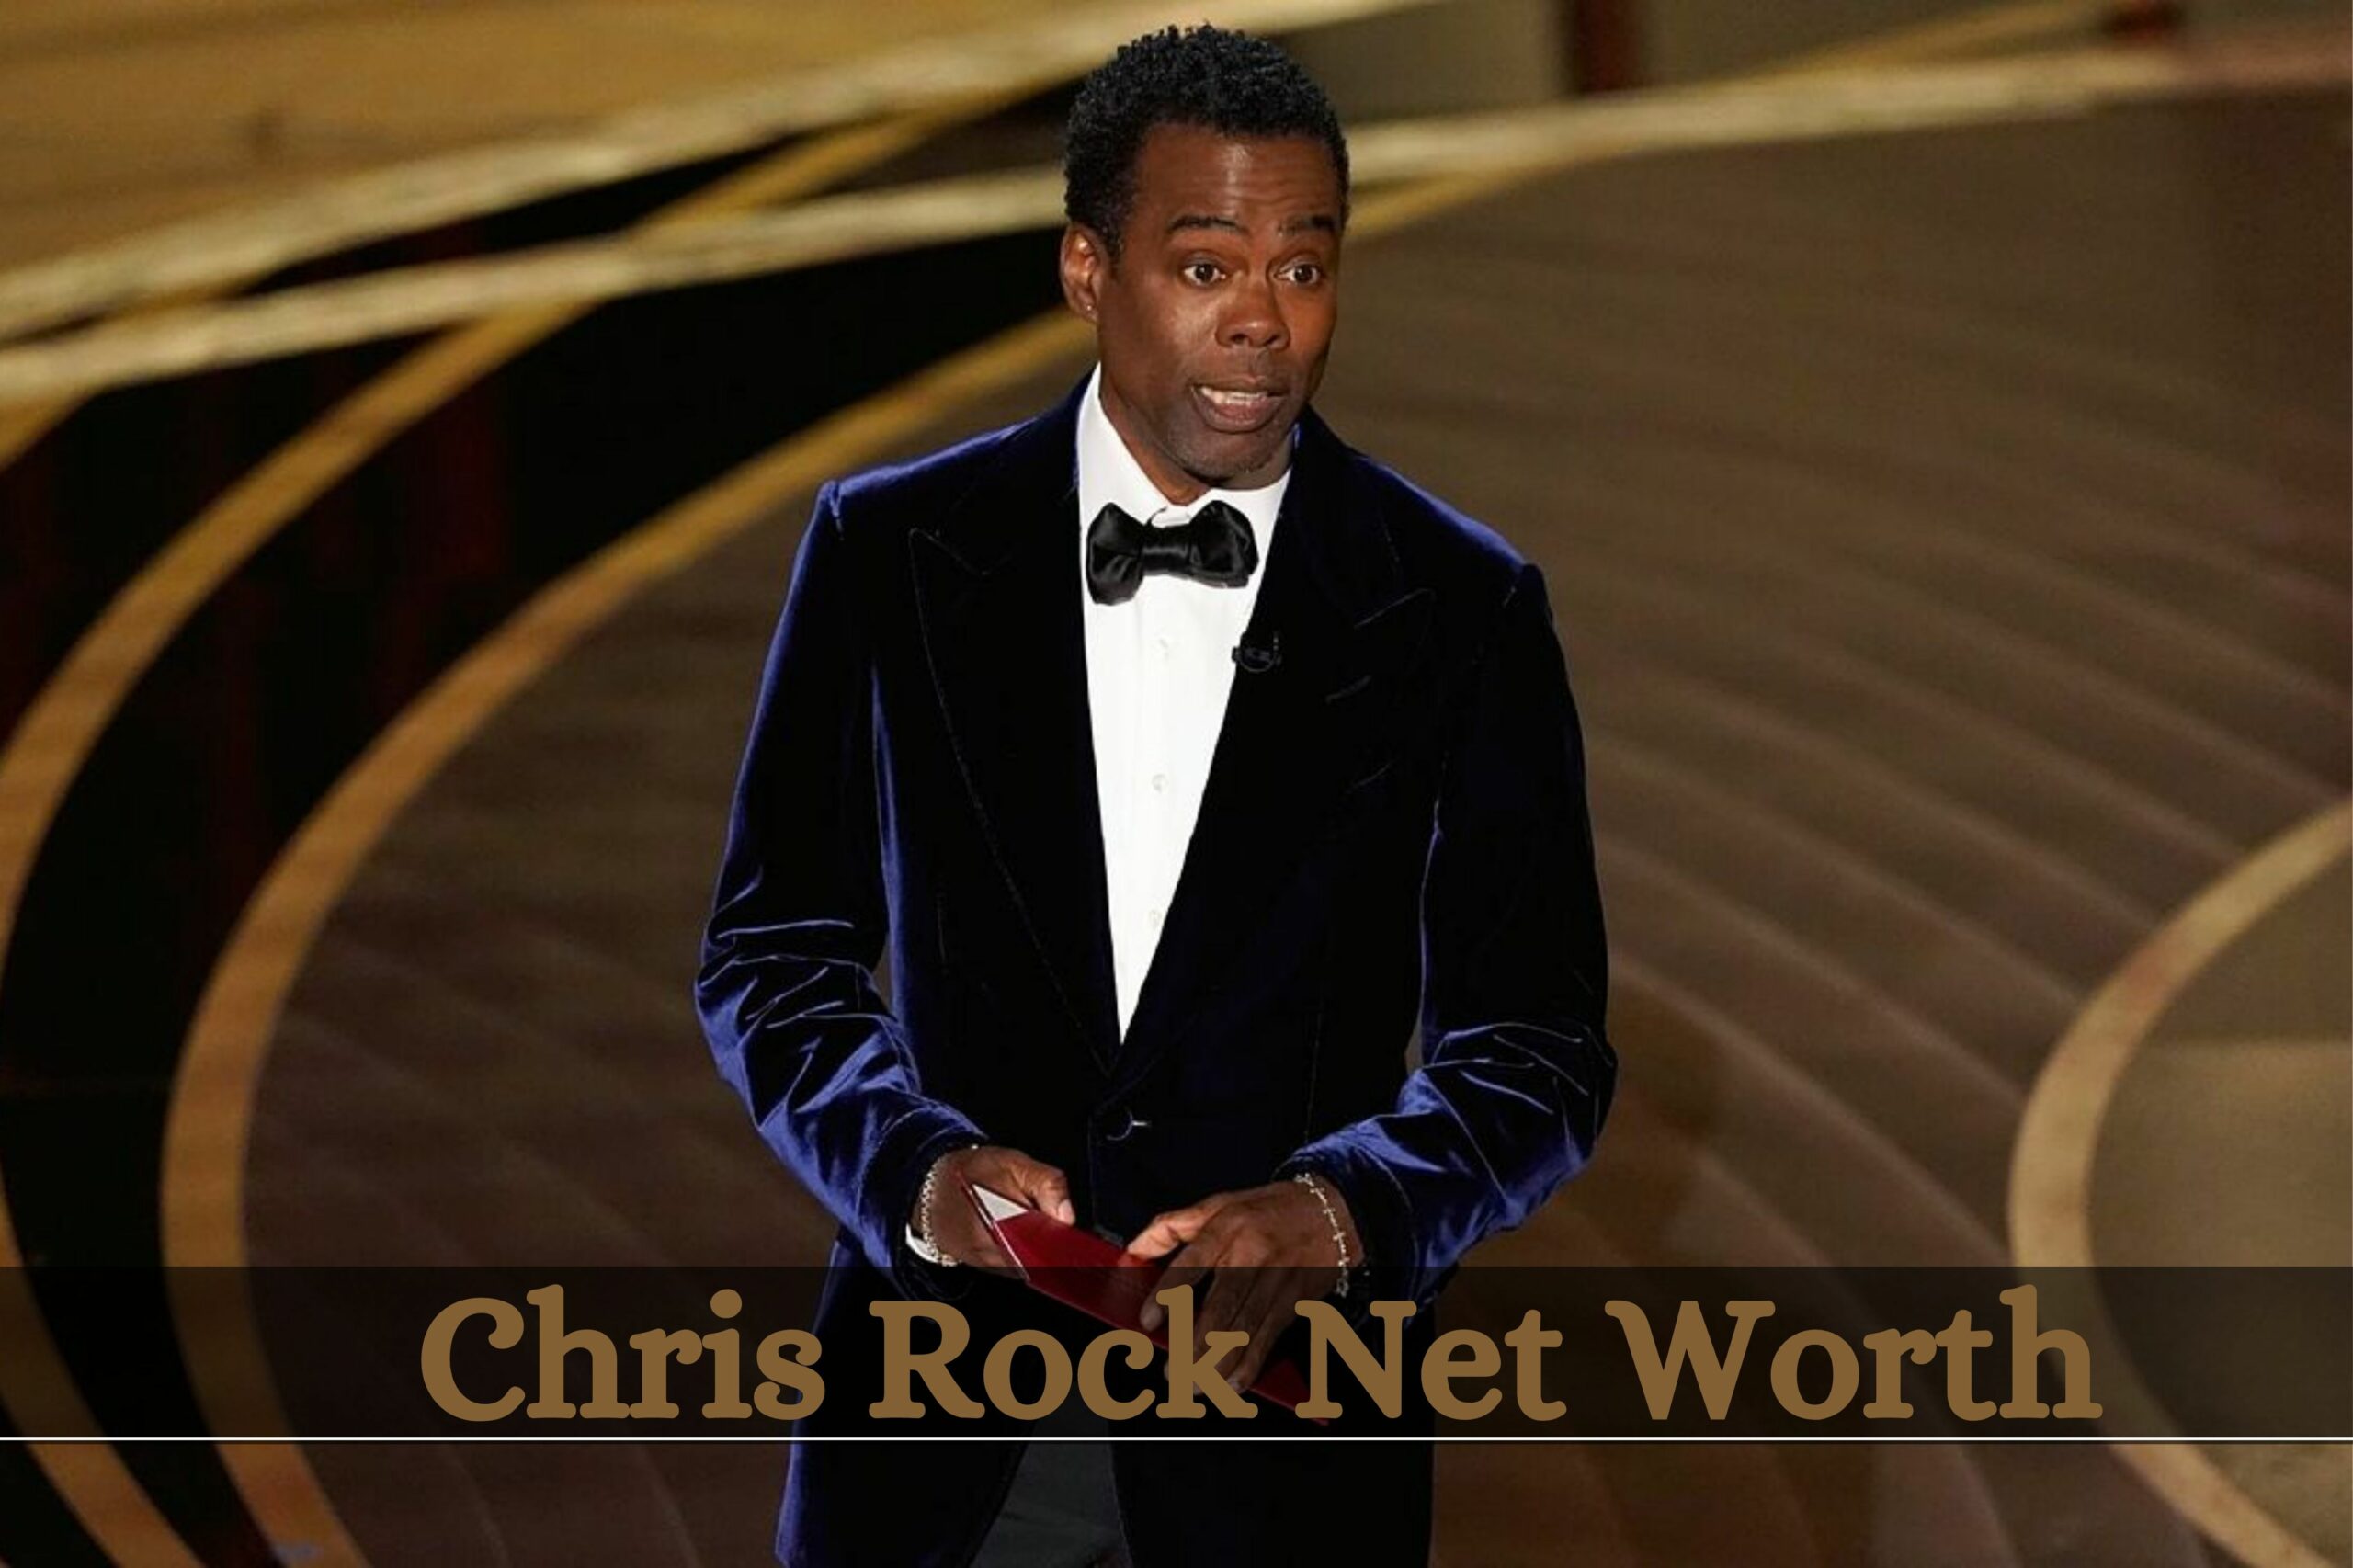 Chris Rock Net worth 2022, How Much Cash Did He Pay In The Divorce Settlement?